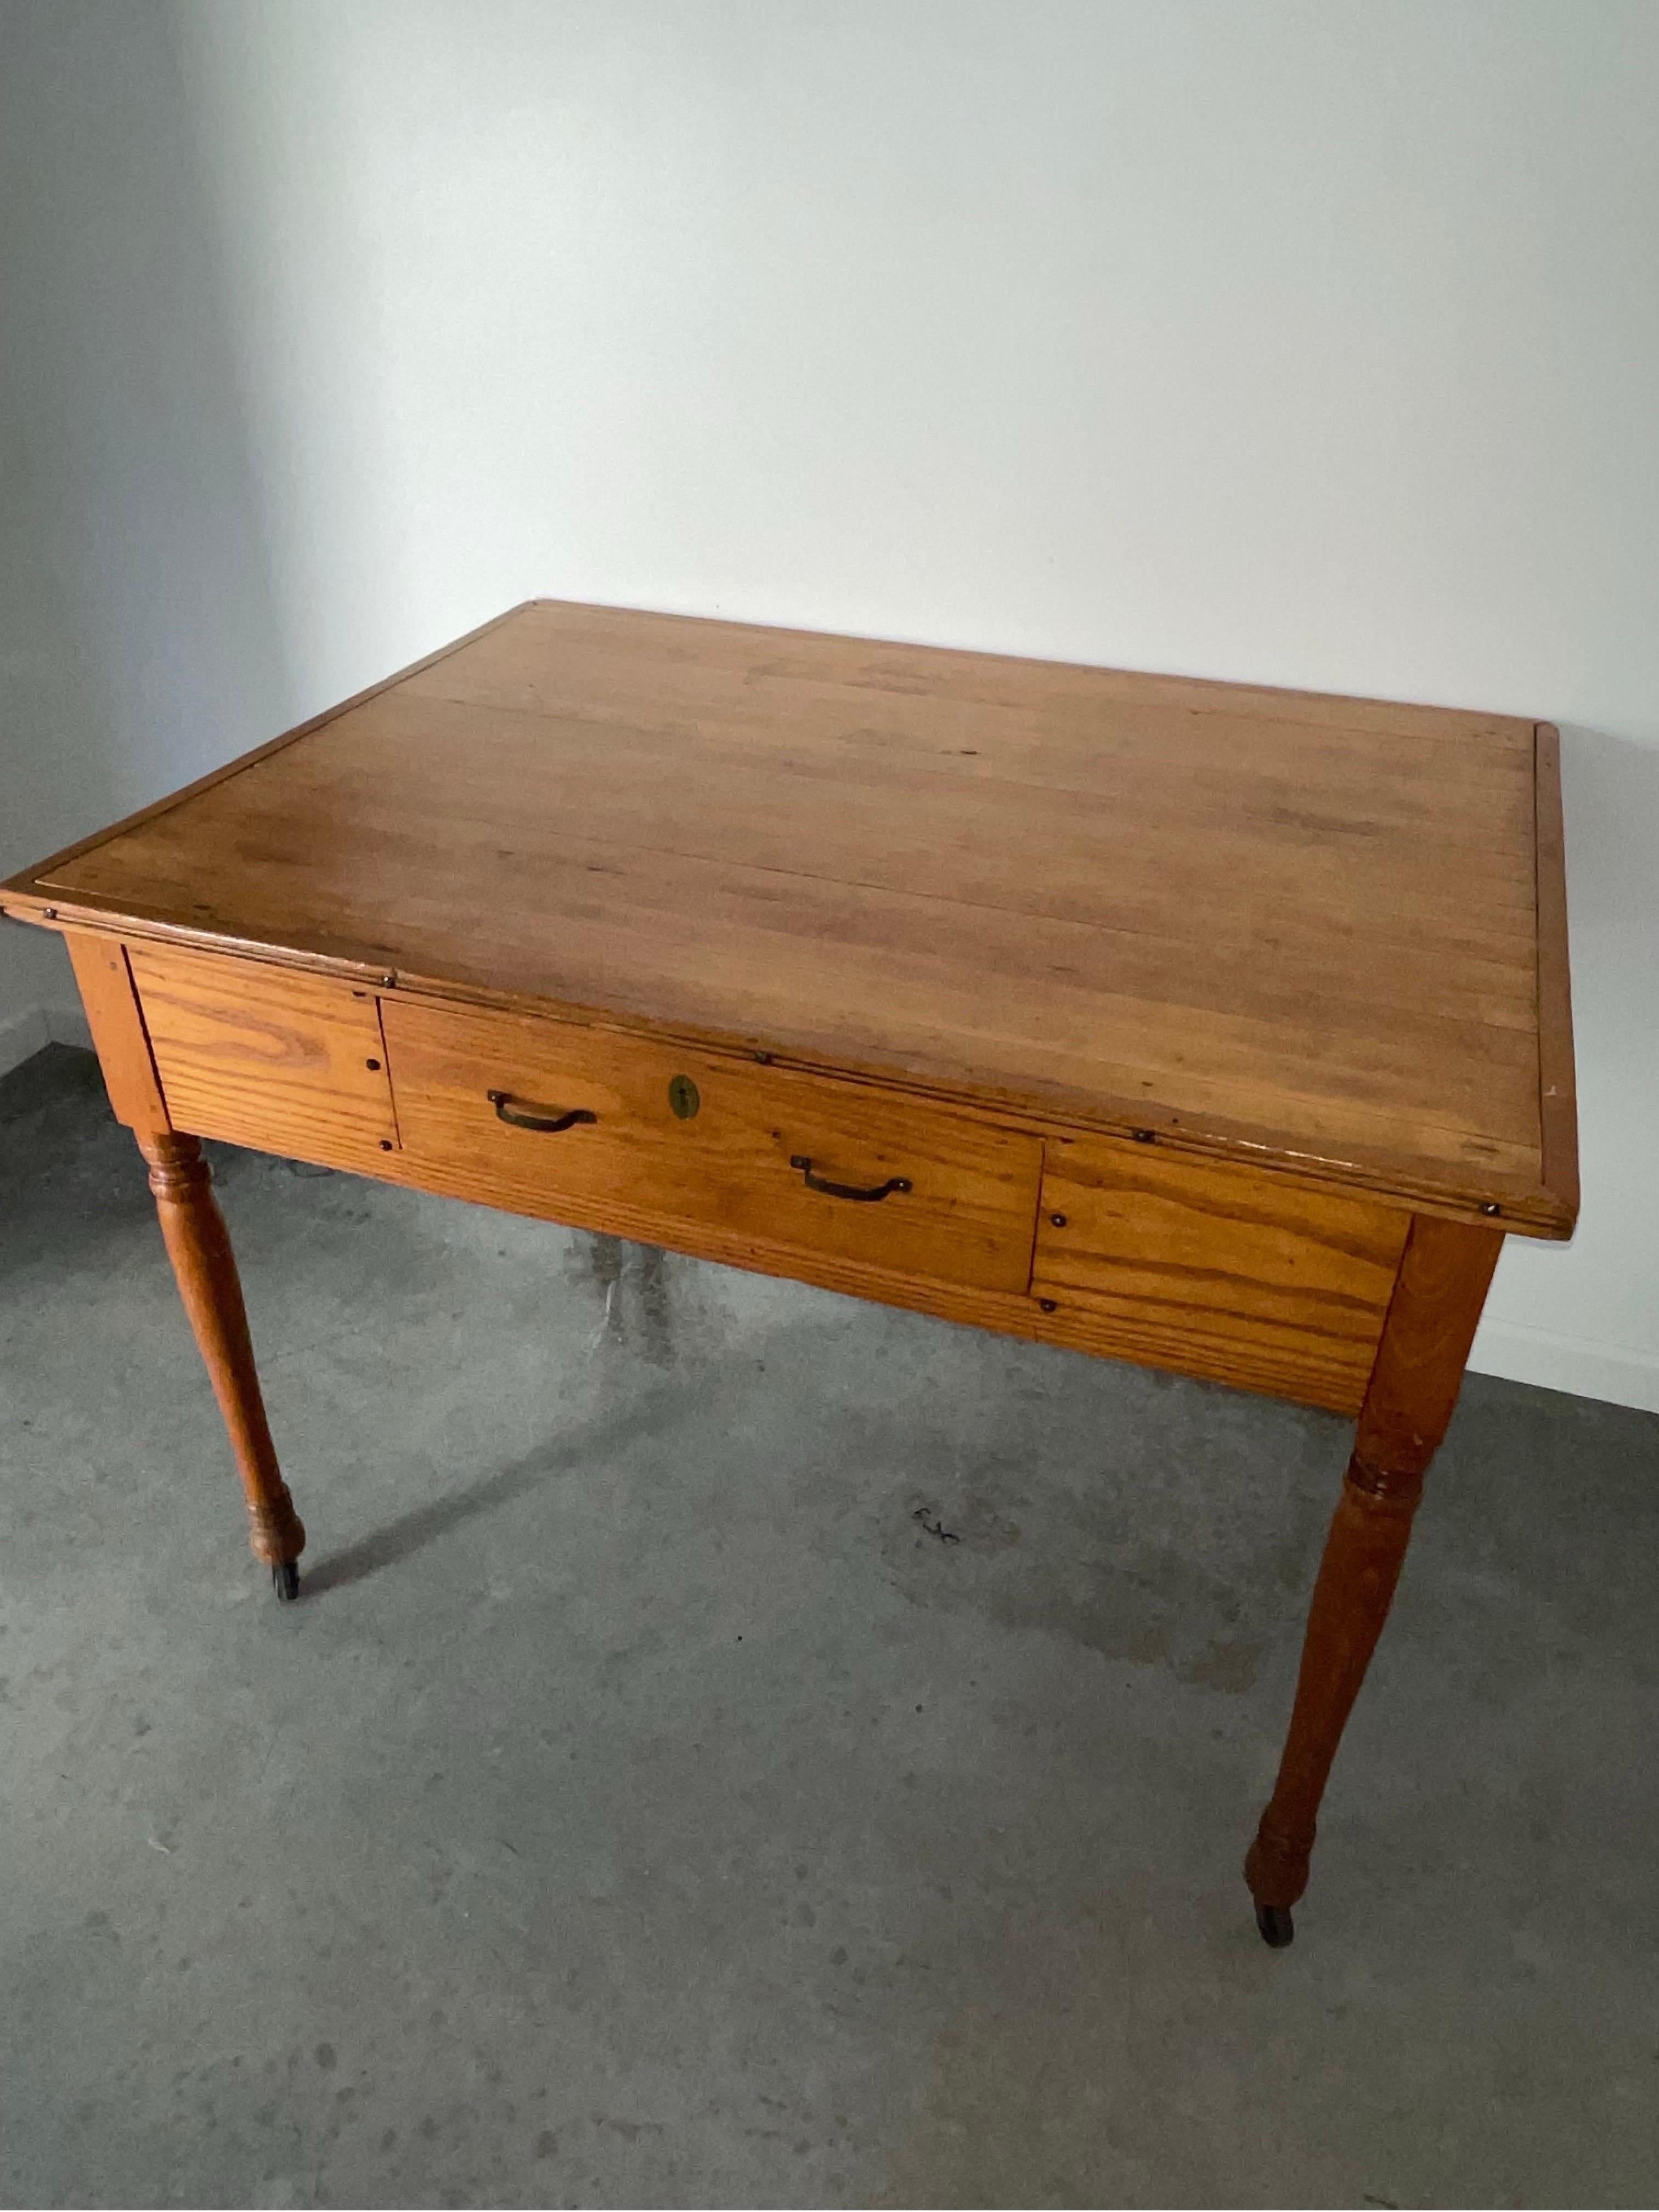 Butcher block Style Top Farm Table or Kitchen Island with casters to easily move around. 

Vintage one drawer wood scrub top work table kitchen island. This stylish work table features carved leg wood base with a very deep drawer with original metal